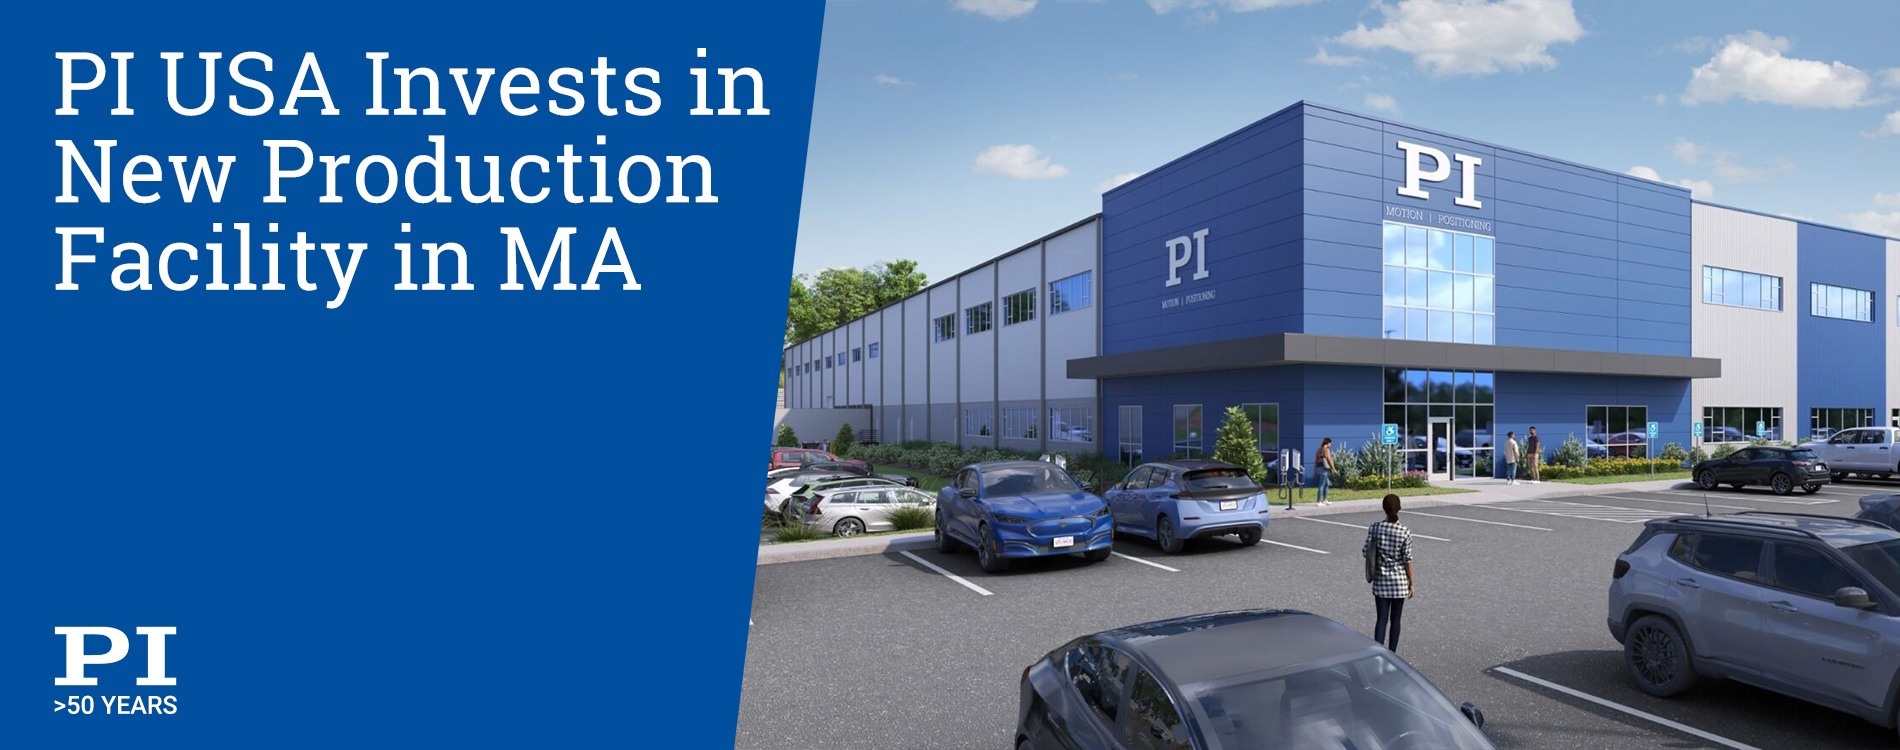 PI USA Invests in New Production Facility in MA to Support Continued Growth of High-Tech Solutions